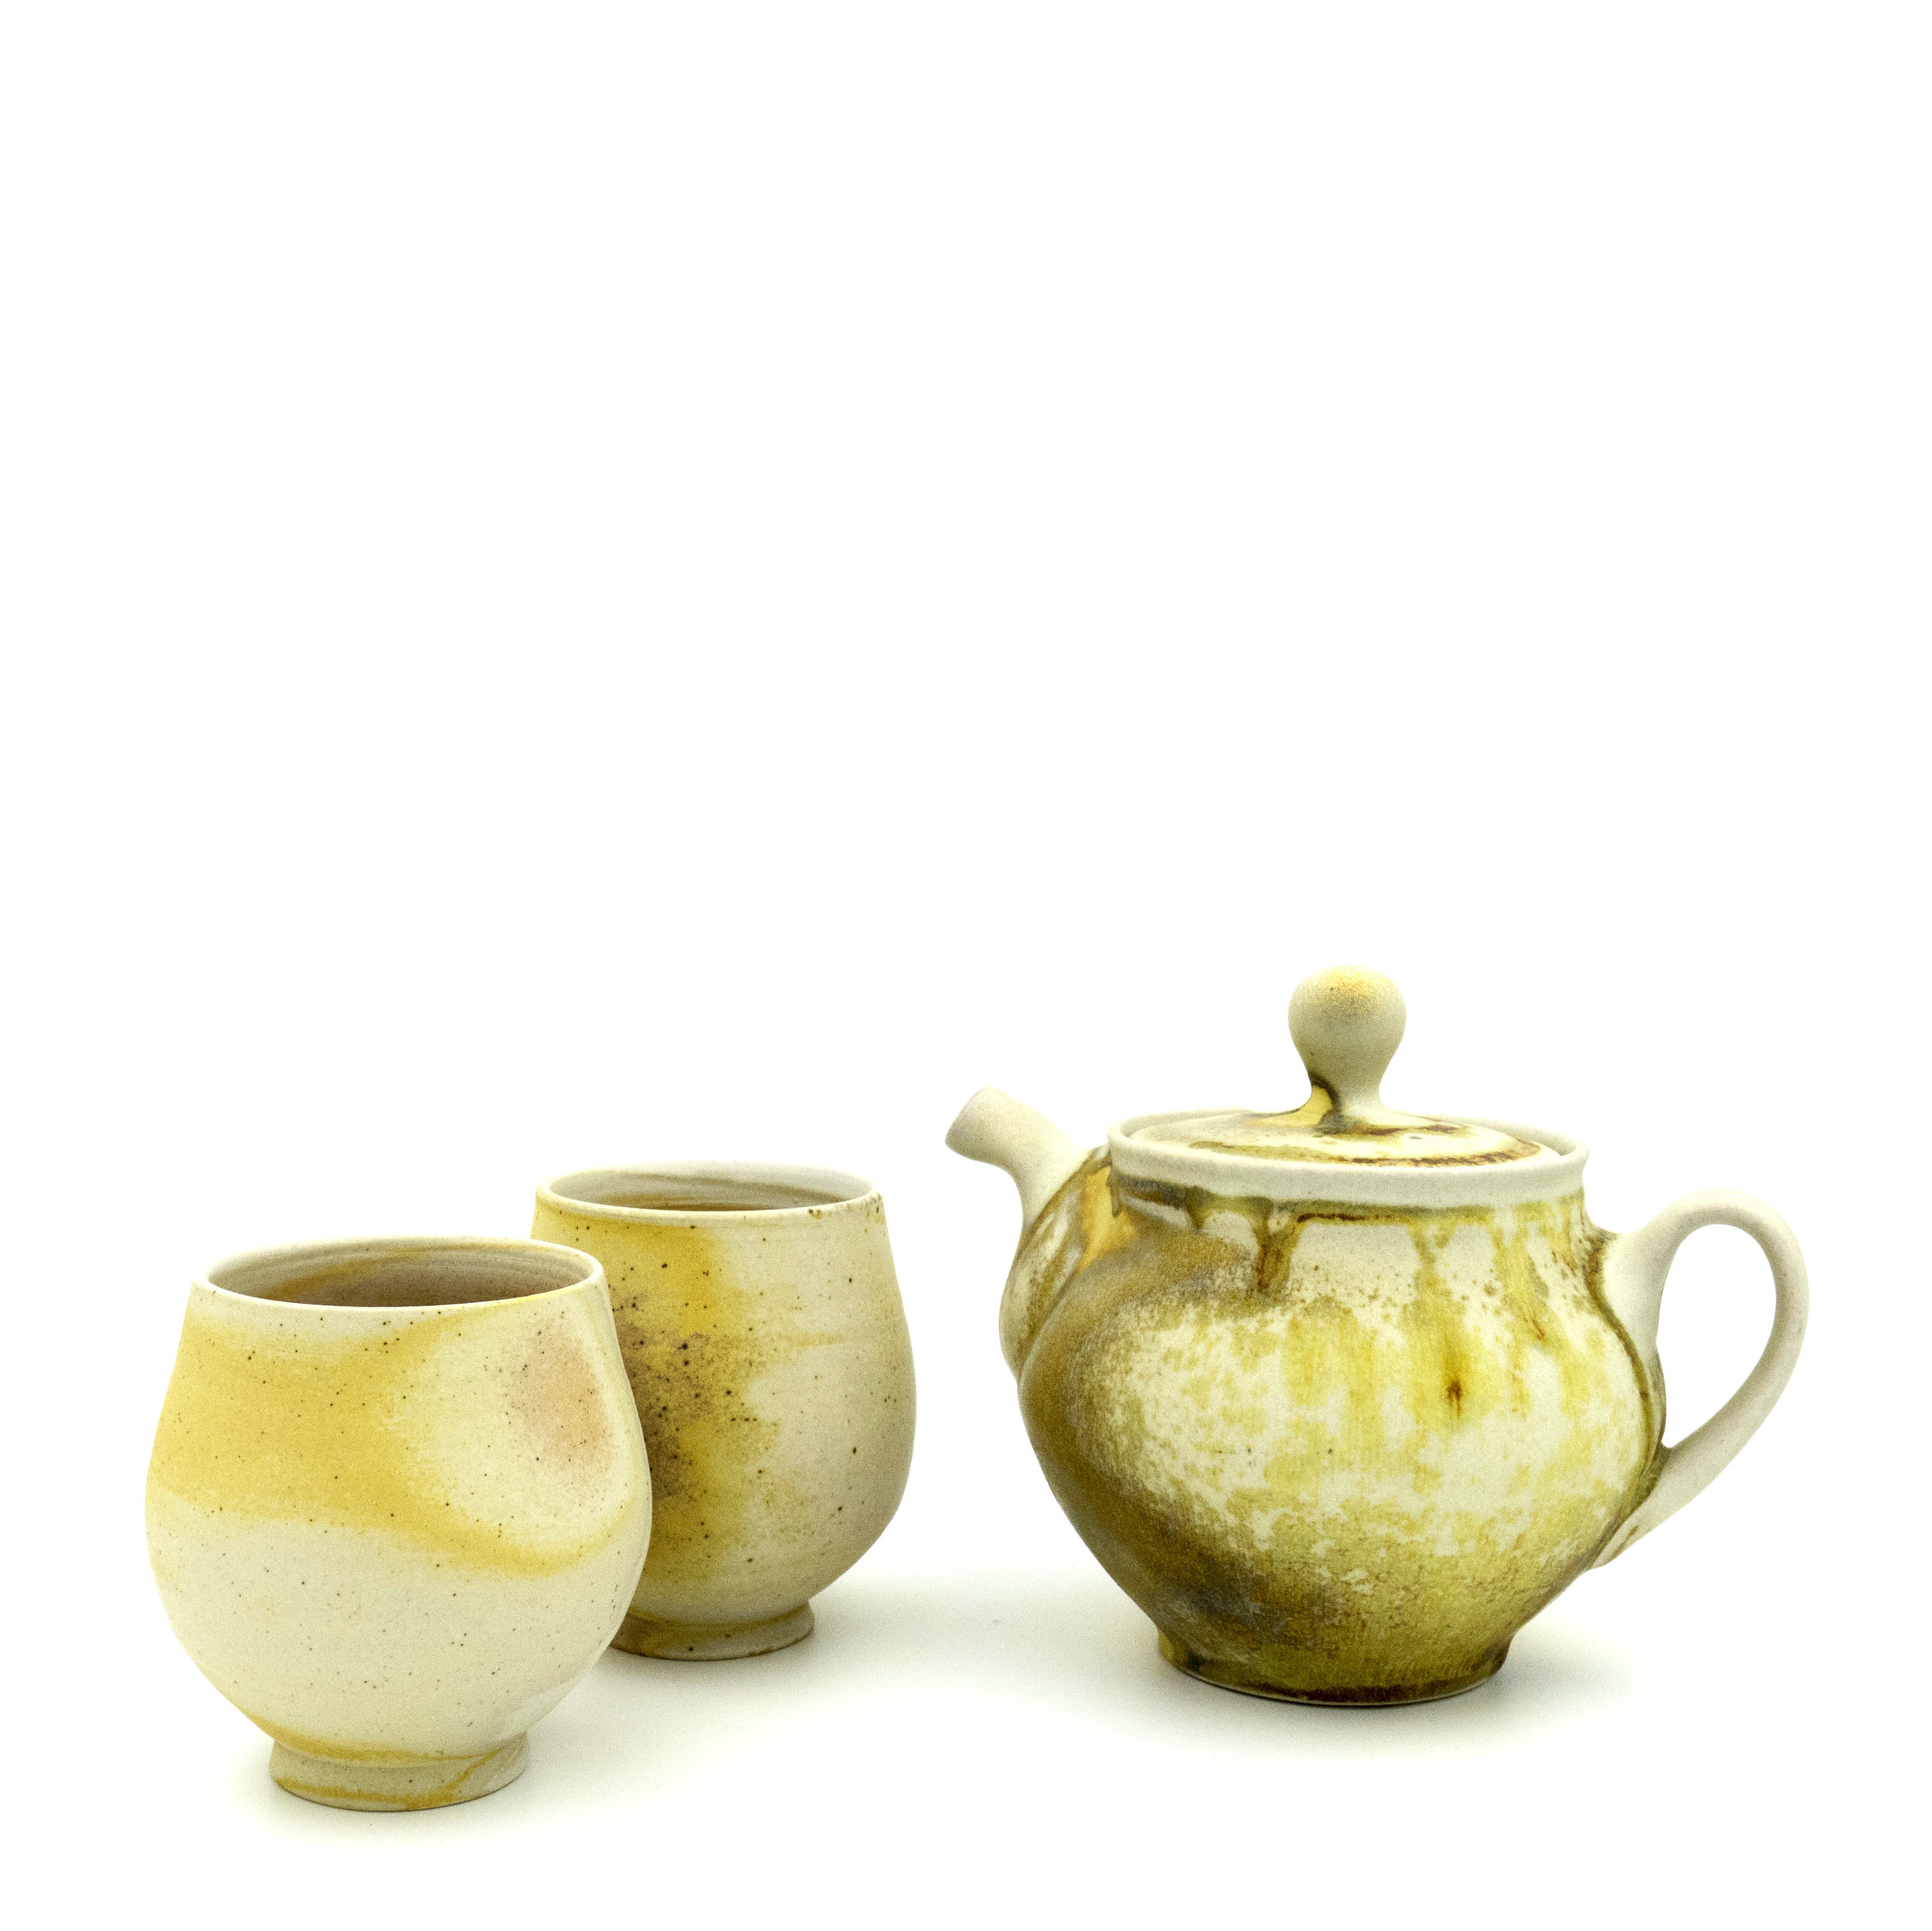   Teapot and Cups , soda fired stoneware, 2018 